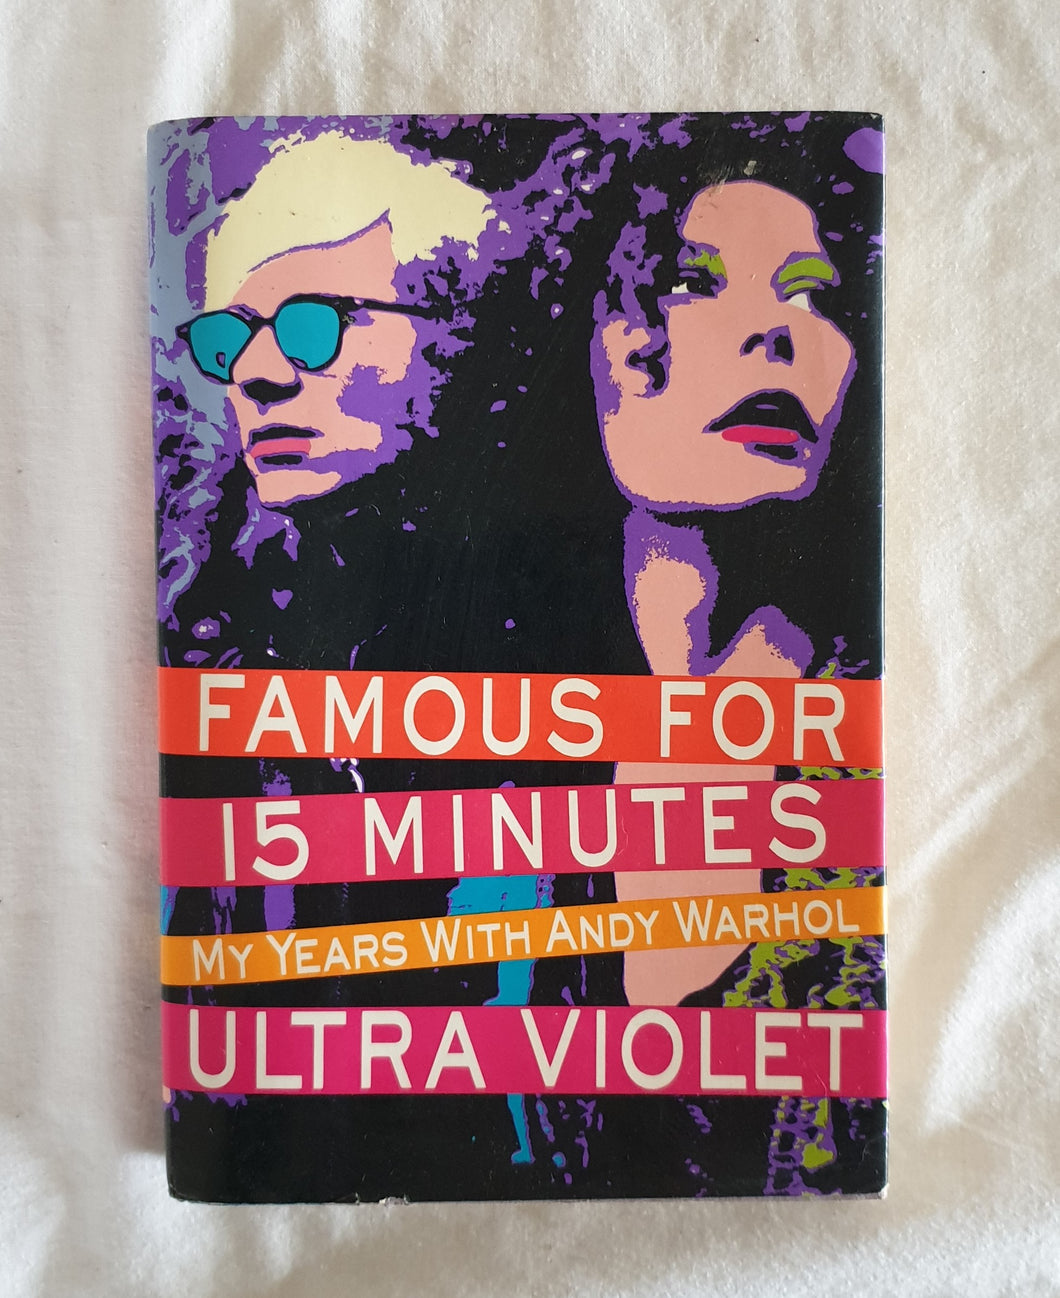 Famous For 15 Minutes  My Years With Andy Warhol  by Ultra Violet